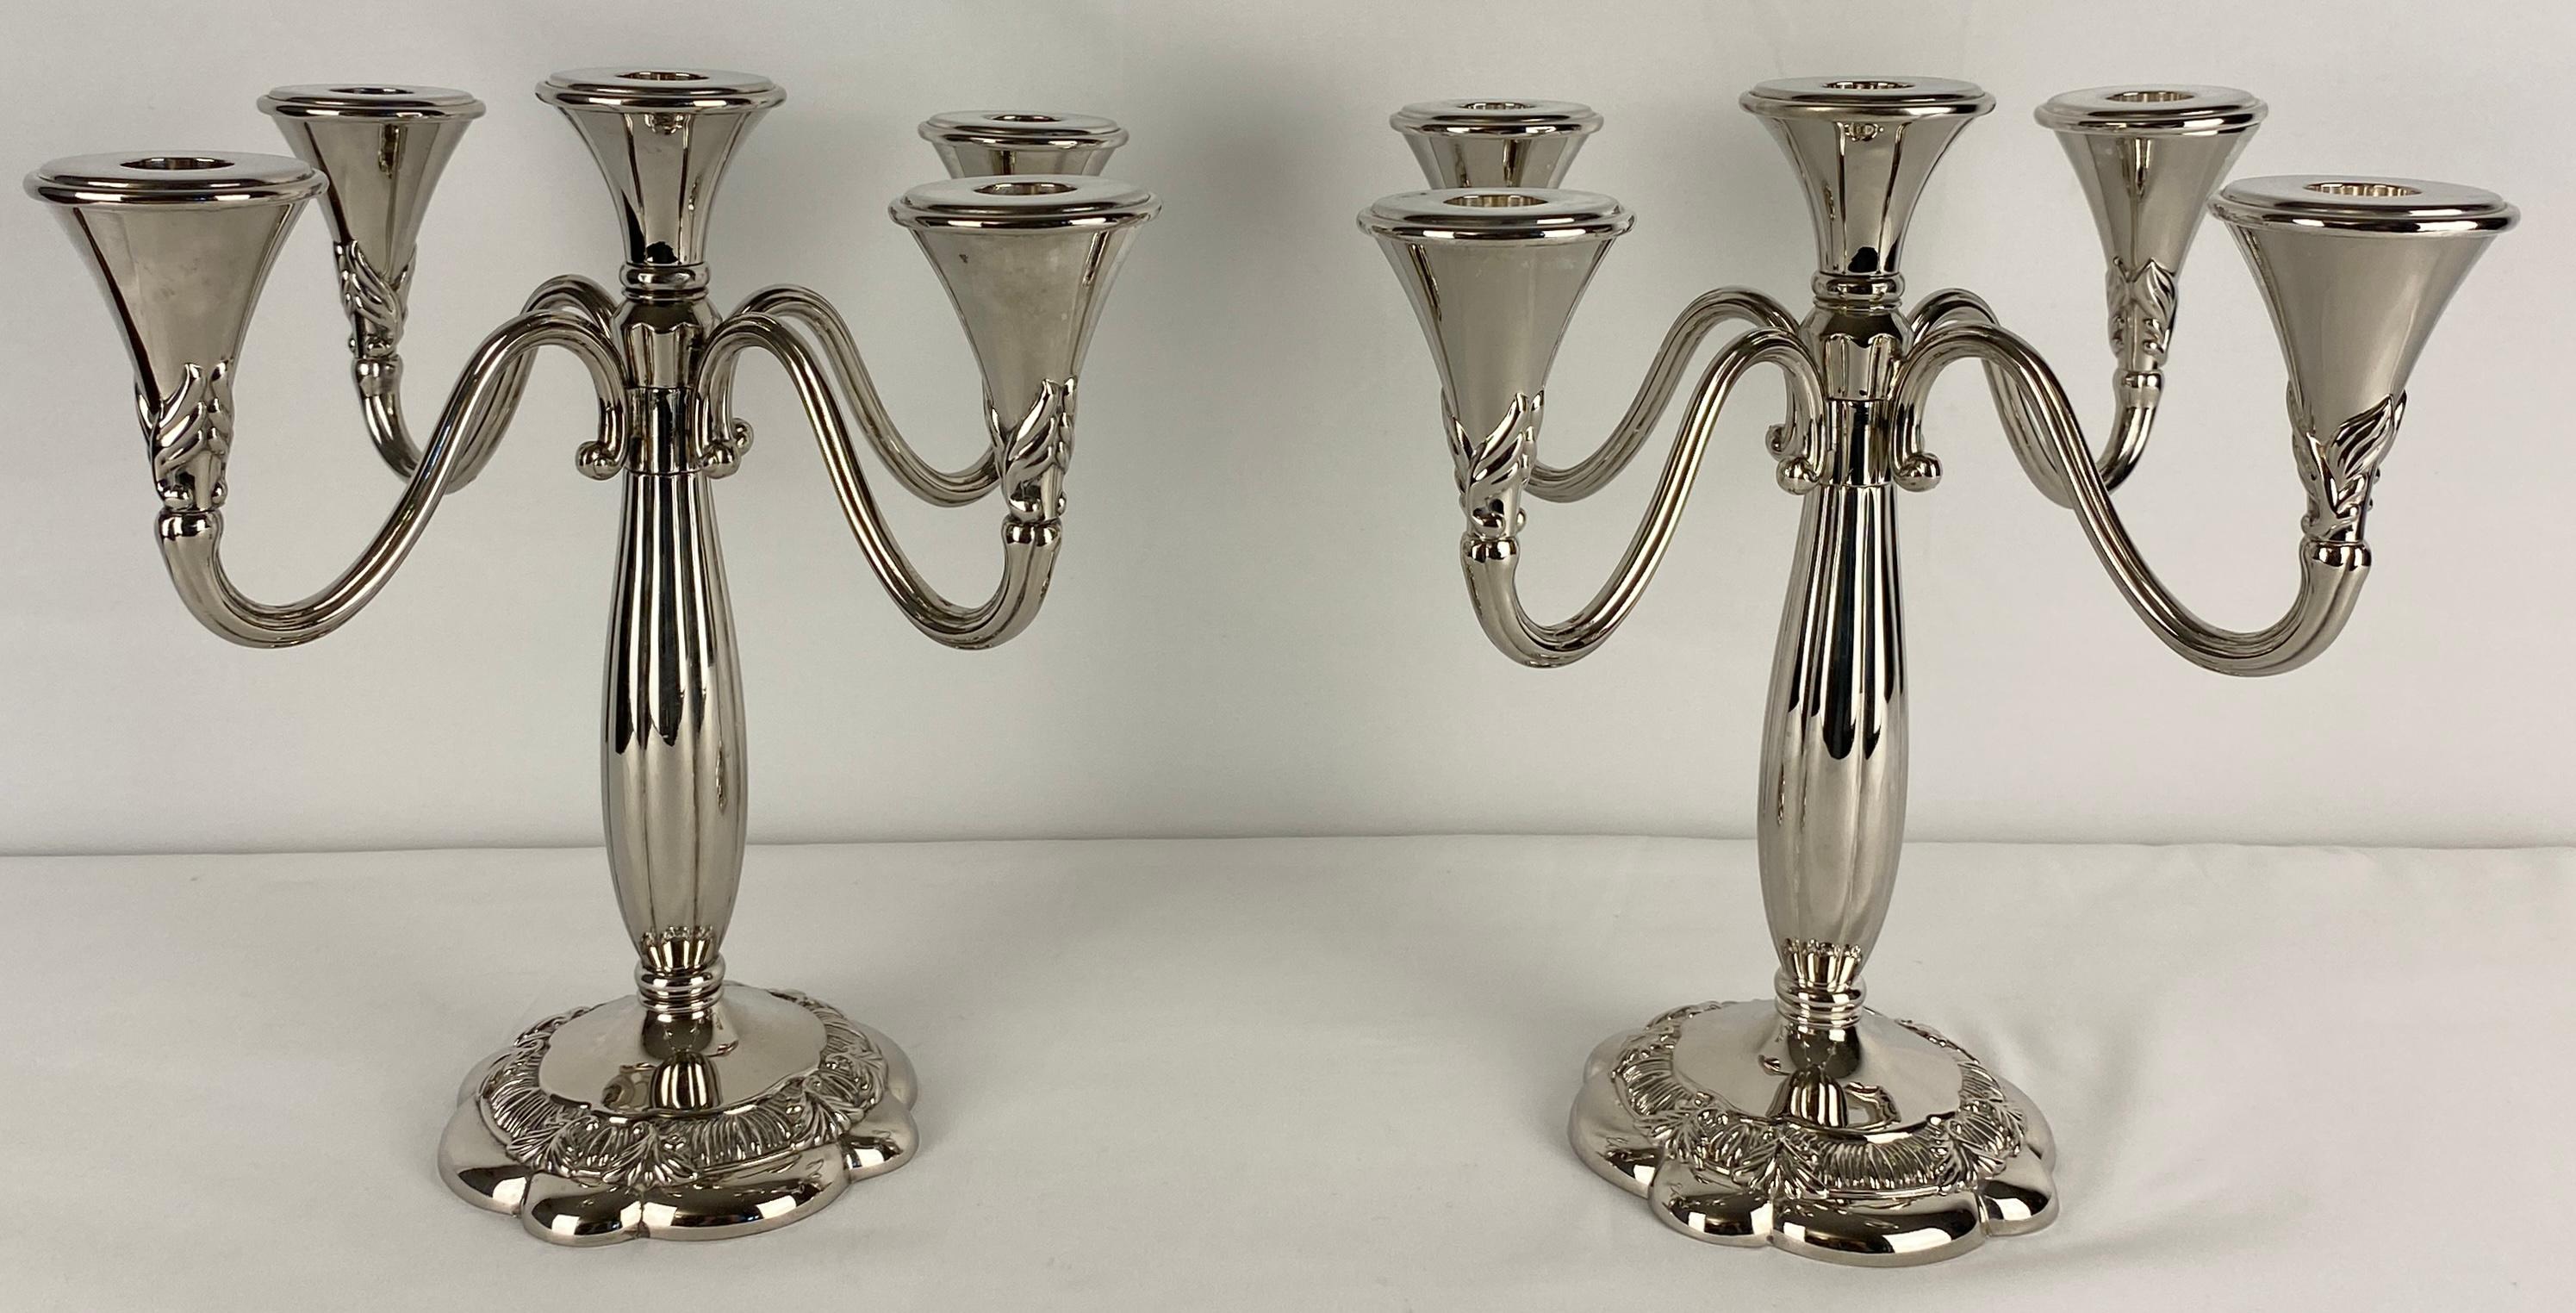 20th Century Pair of Art Deco Style Silver Plated Candelabras by Royal Gallery For Sale